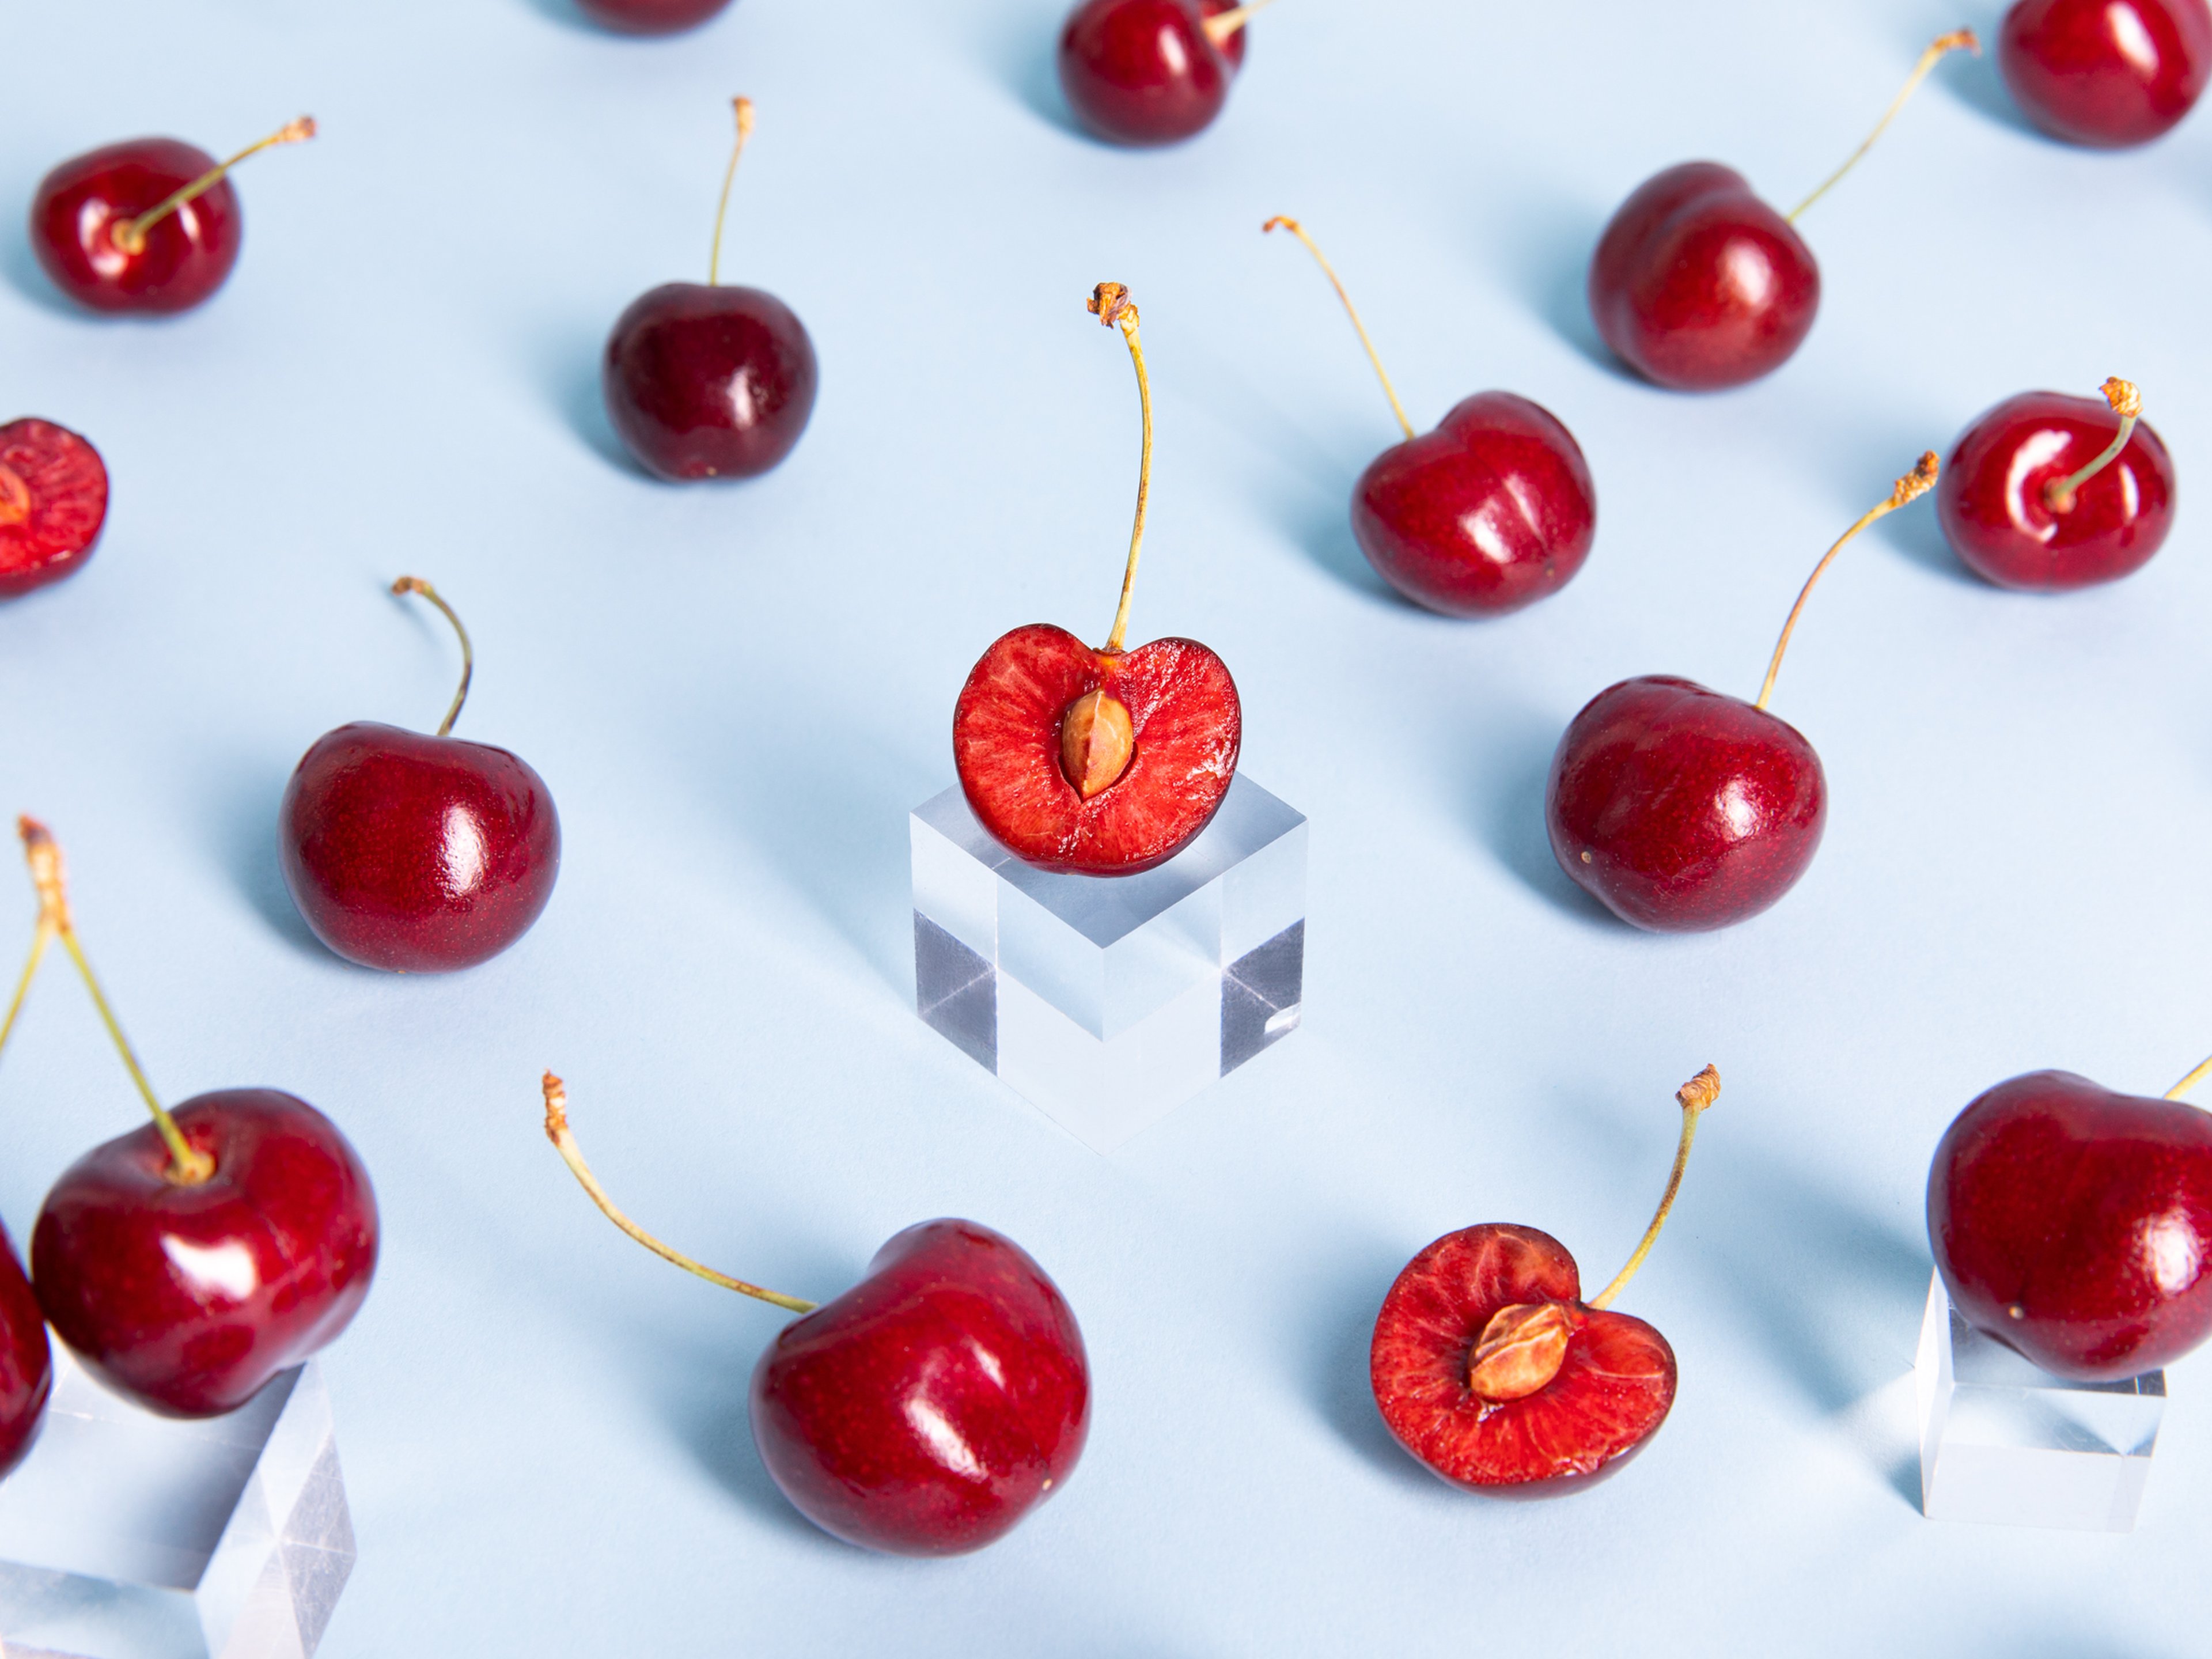 Everything You Need to Know About Preparing and Storing In Season Sour Cherries